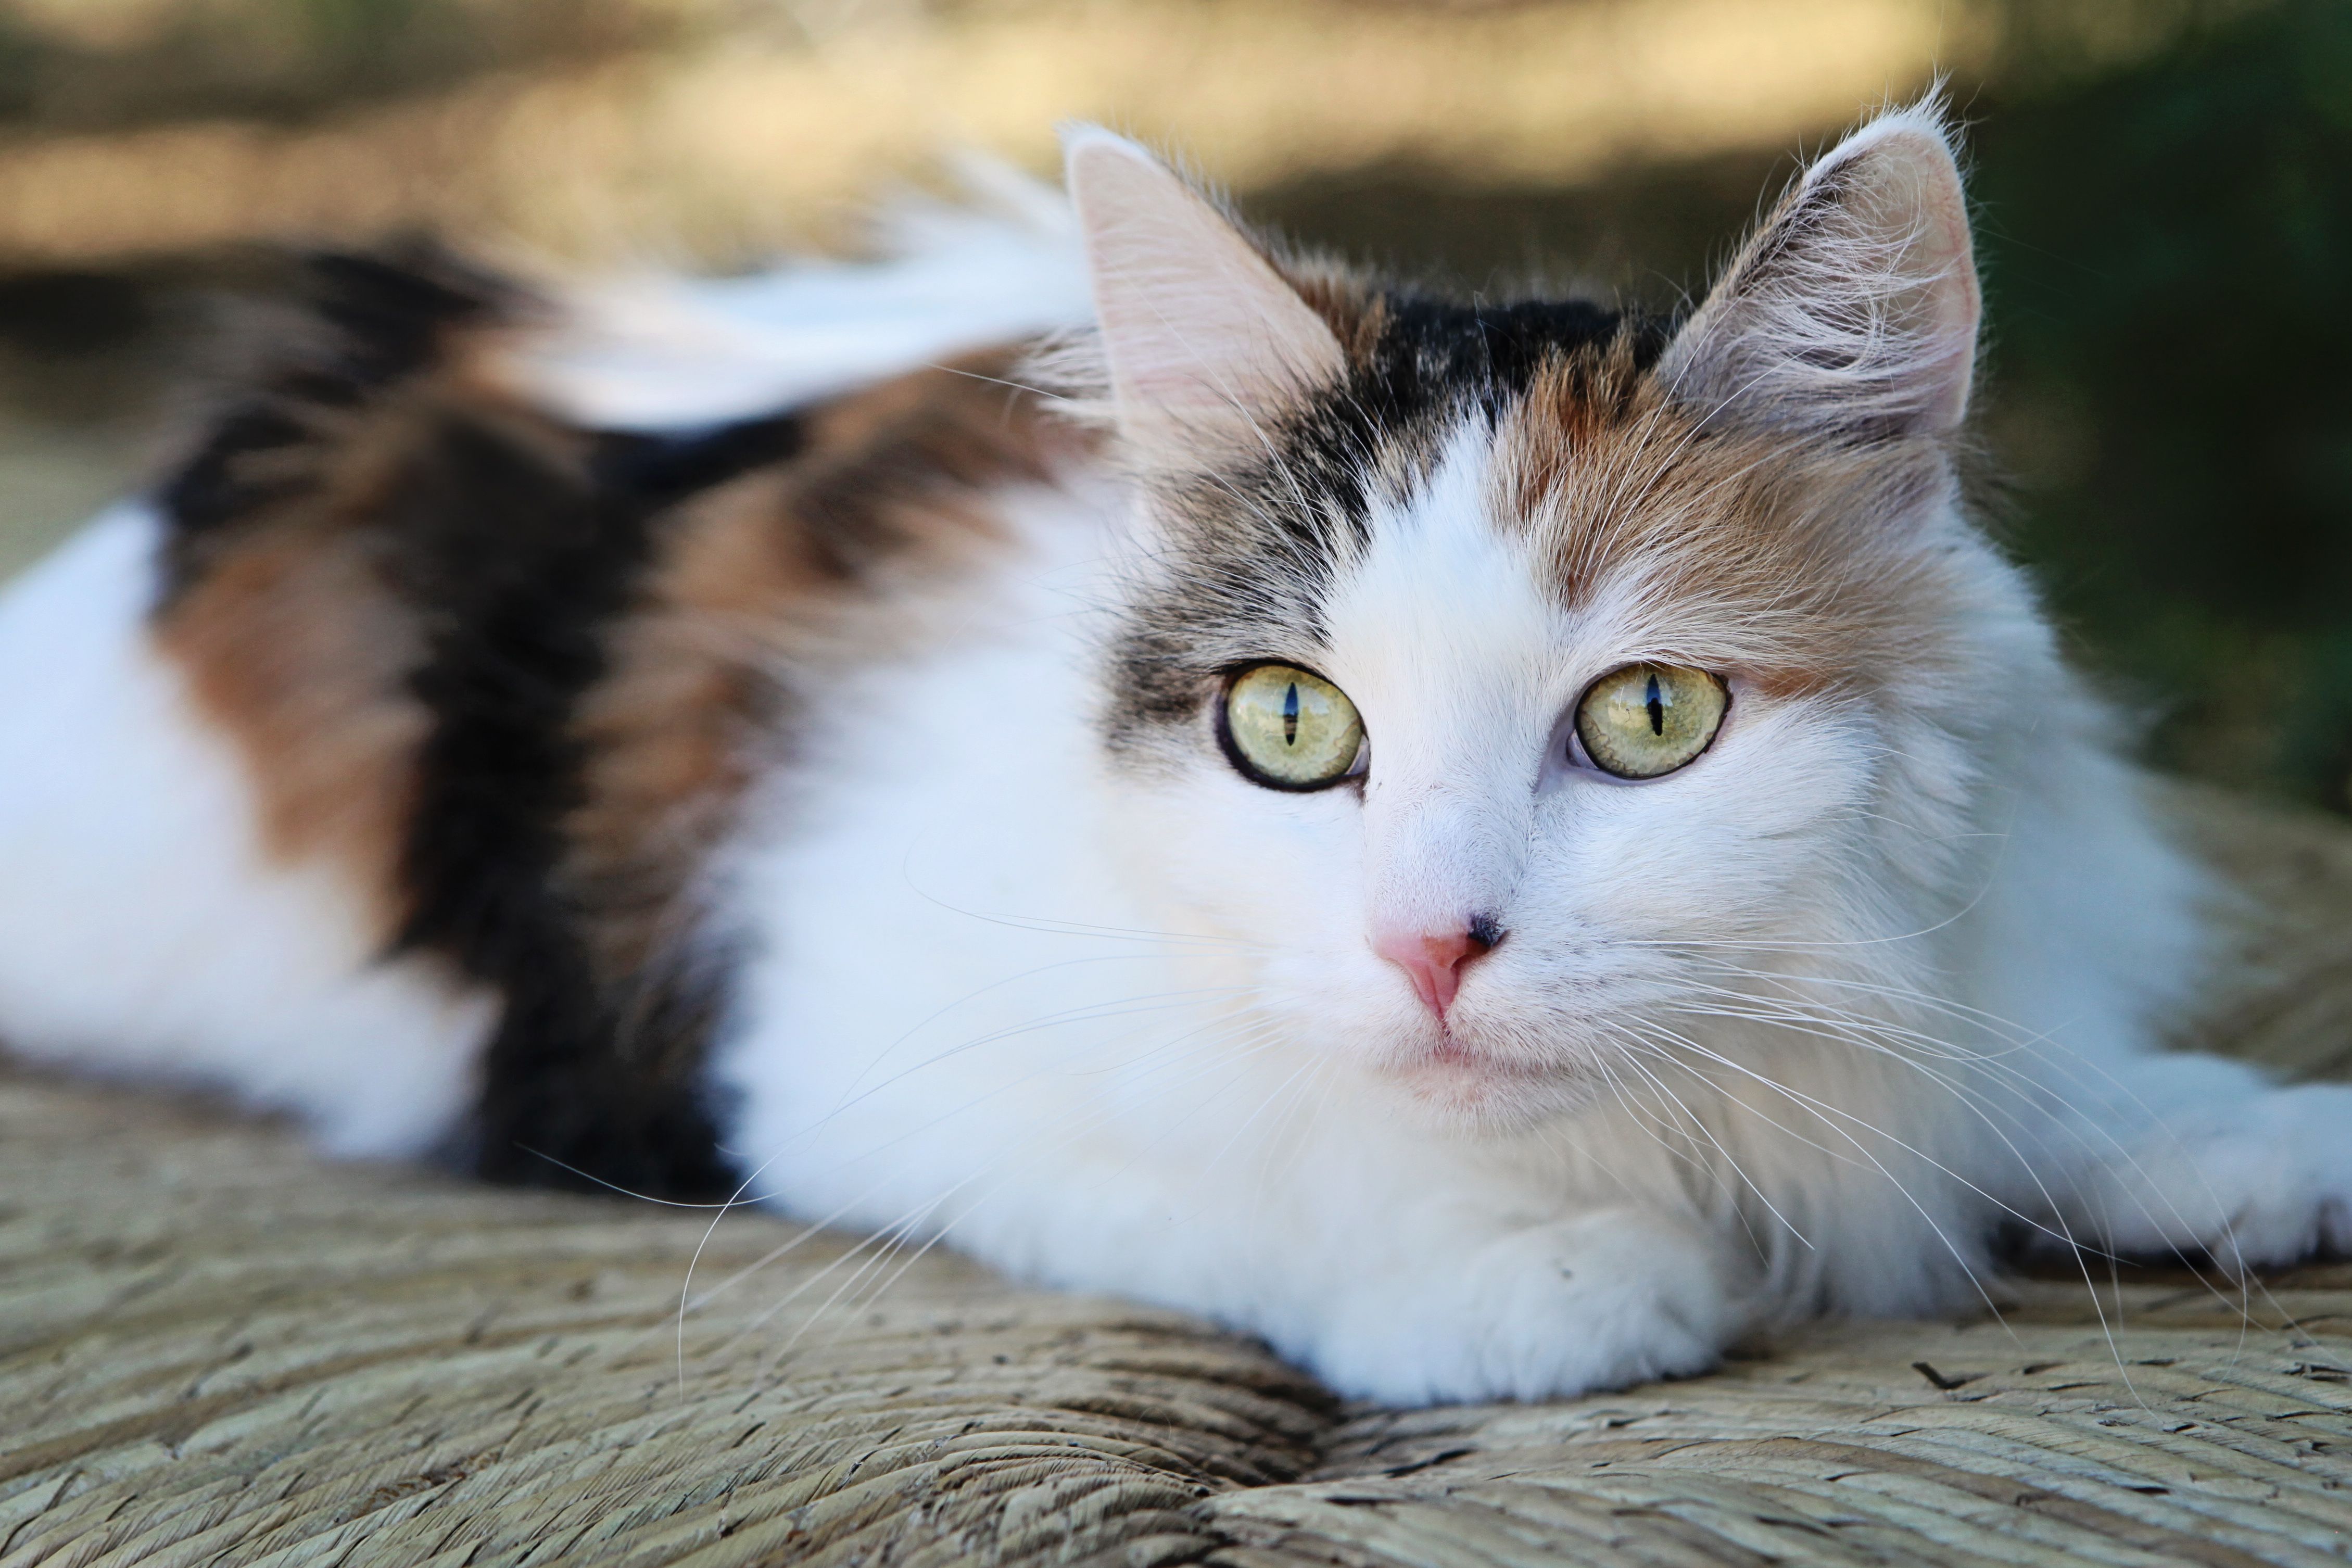 Fiona, long haired calico cat